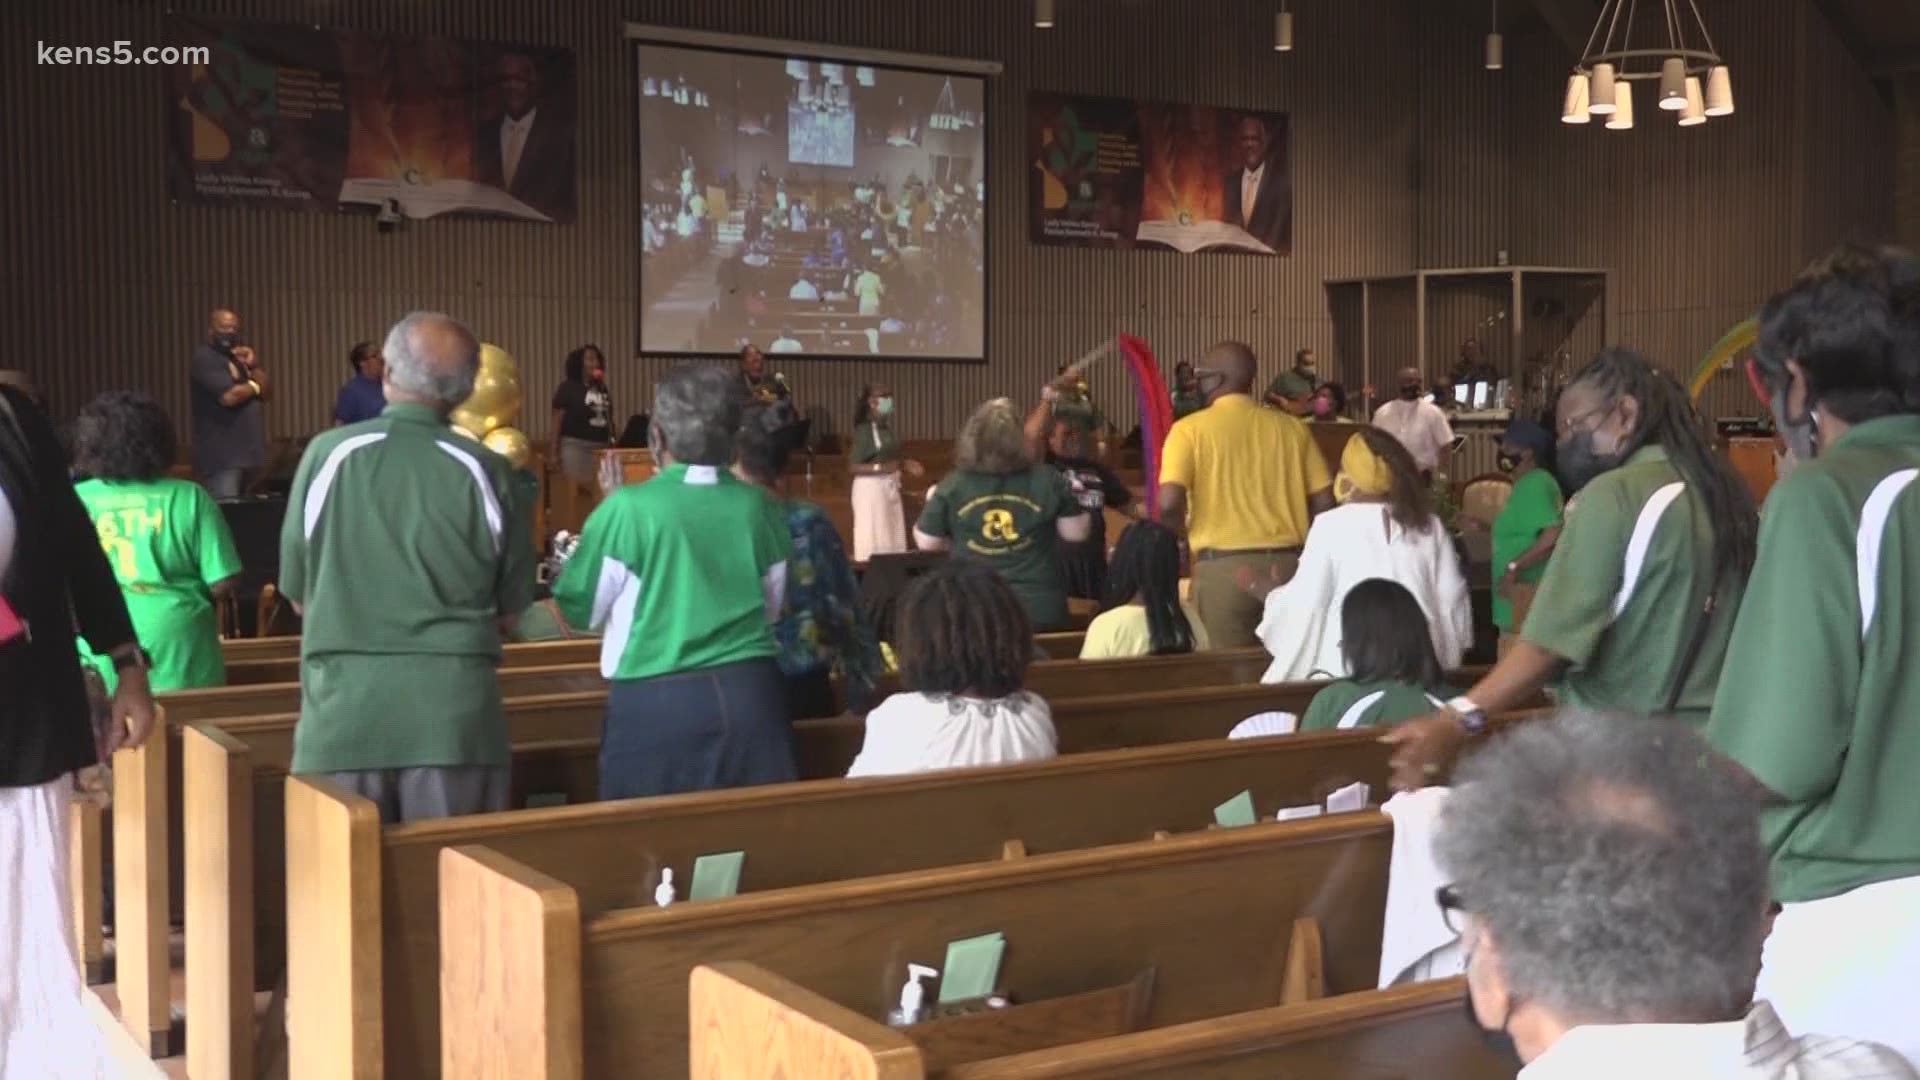 Antioch Missionary Baptist Church back in service after shutting down during pandemic kens5